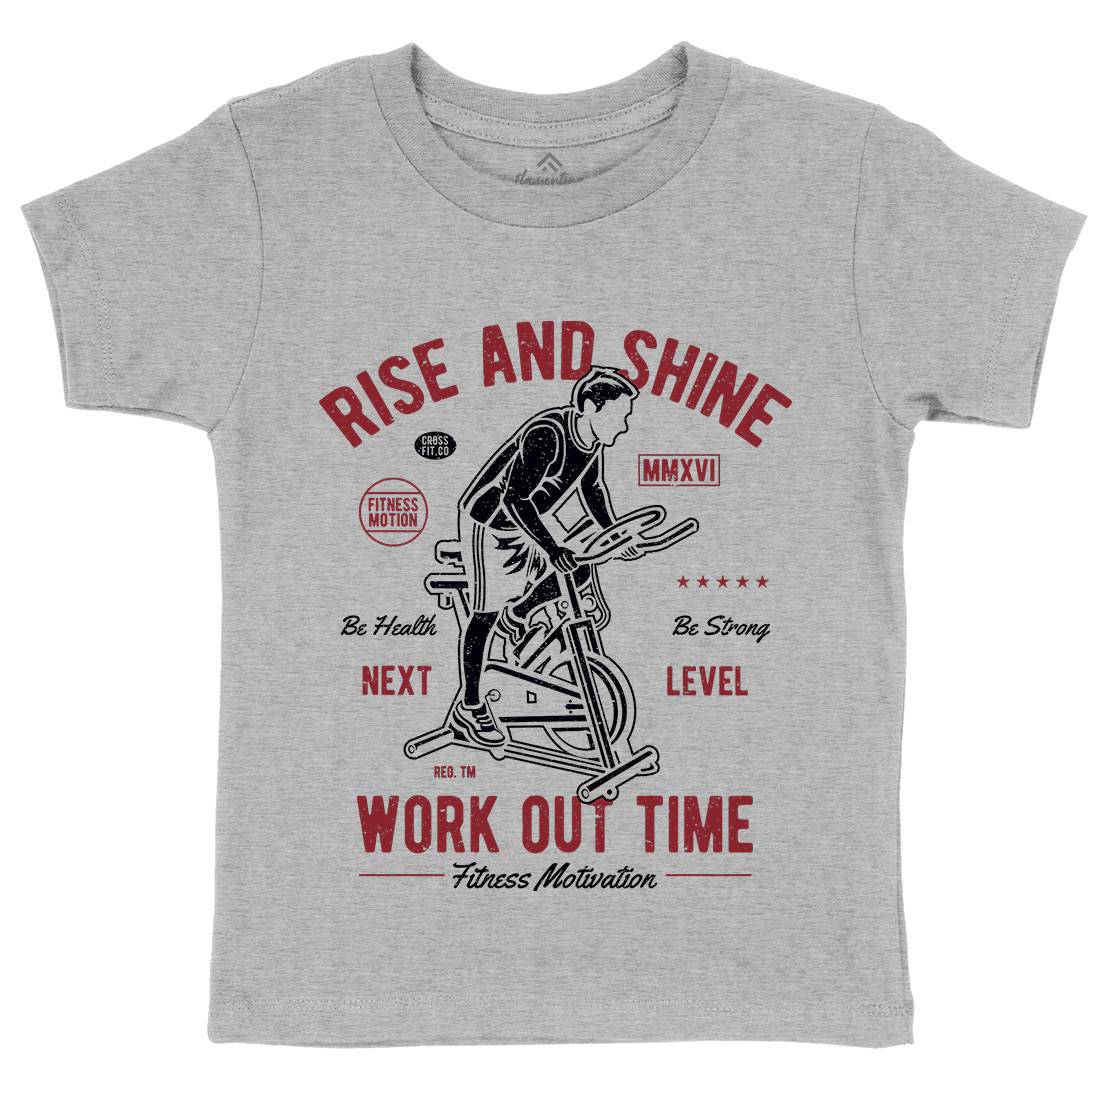 Work Out Time Kids Crew Neck T-Shirt Gym A199